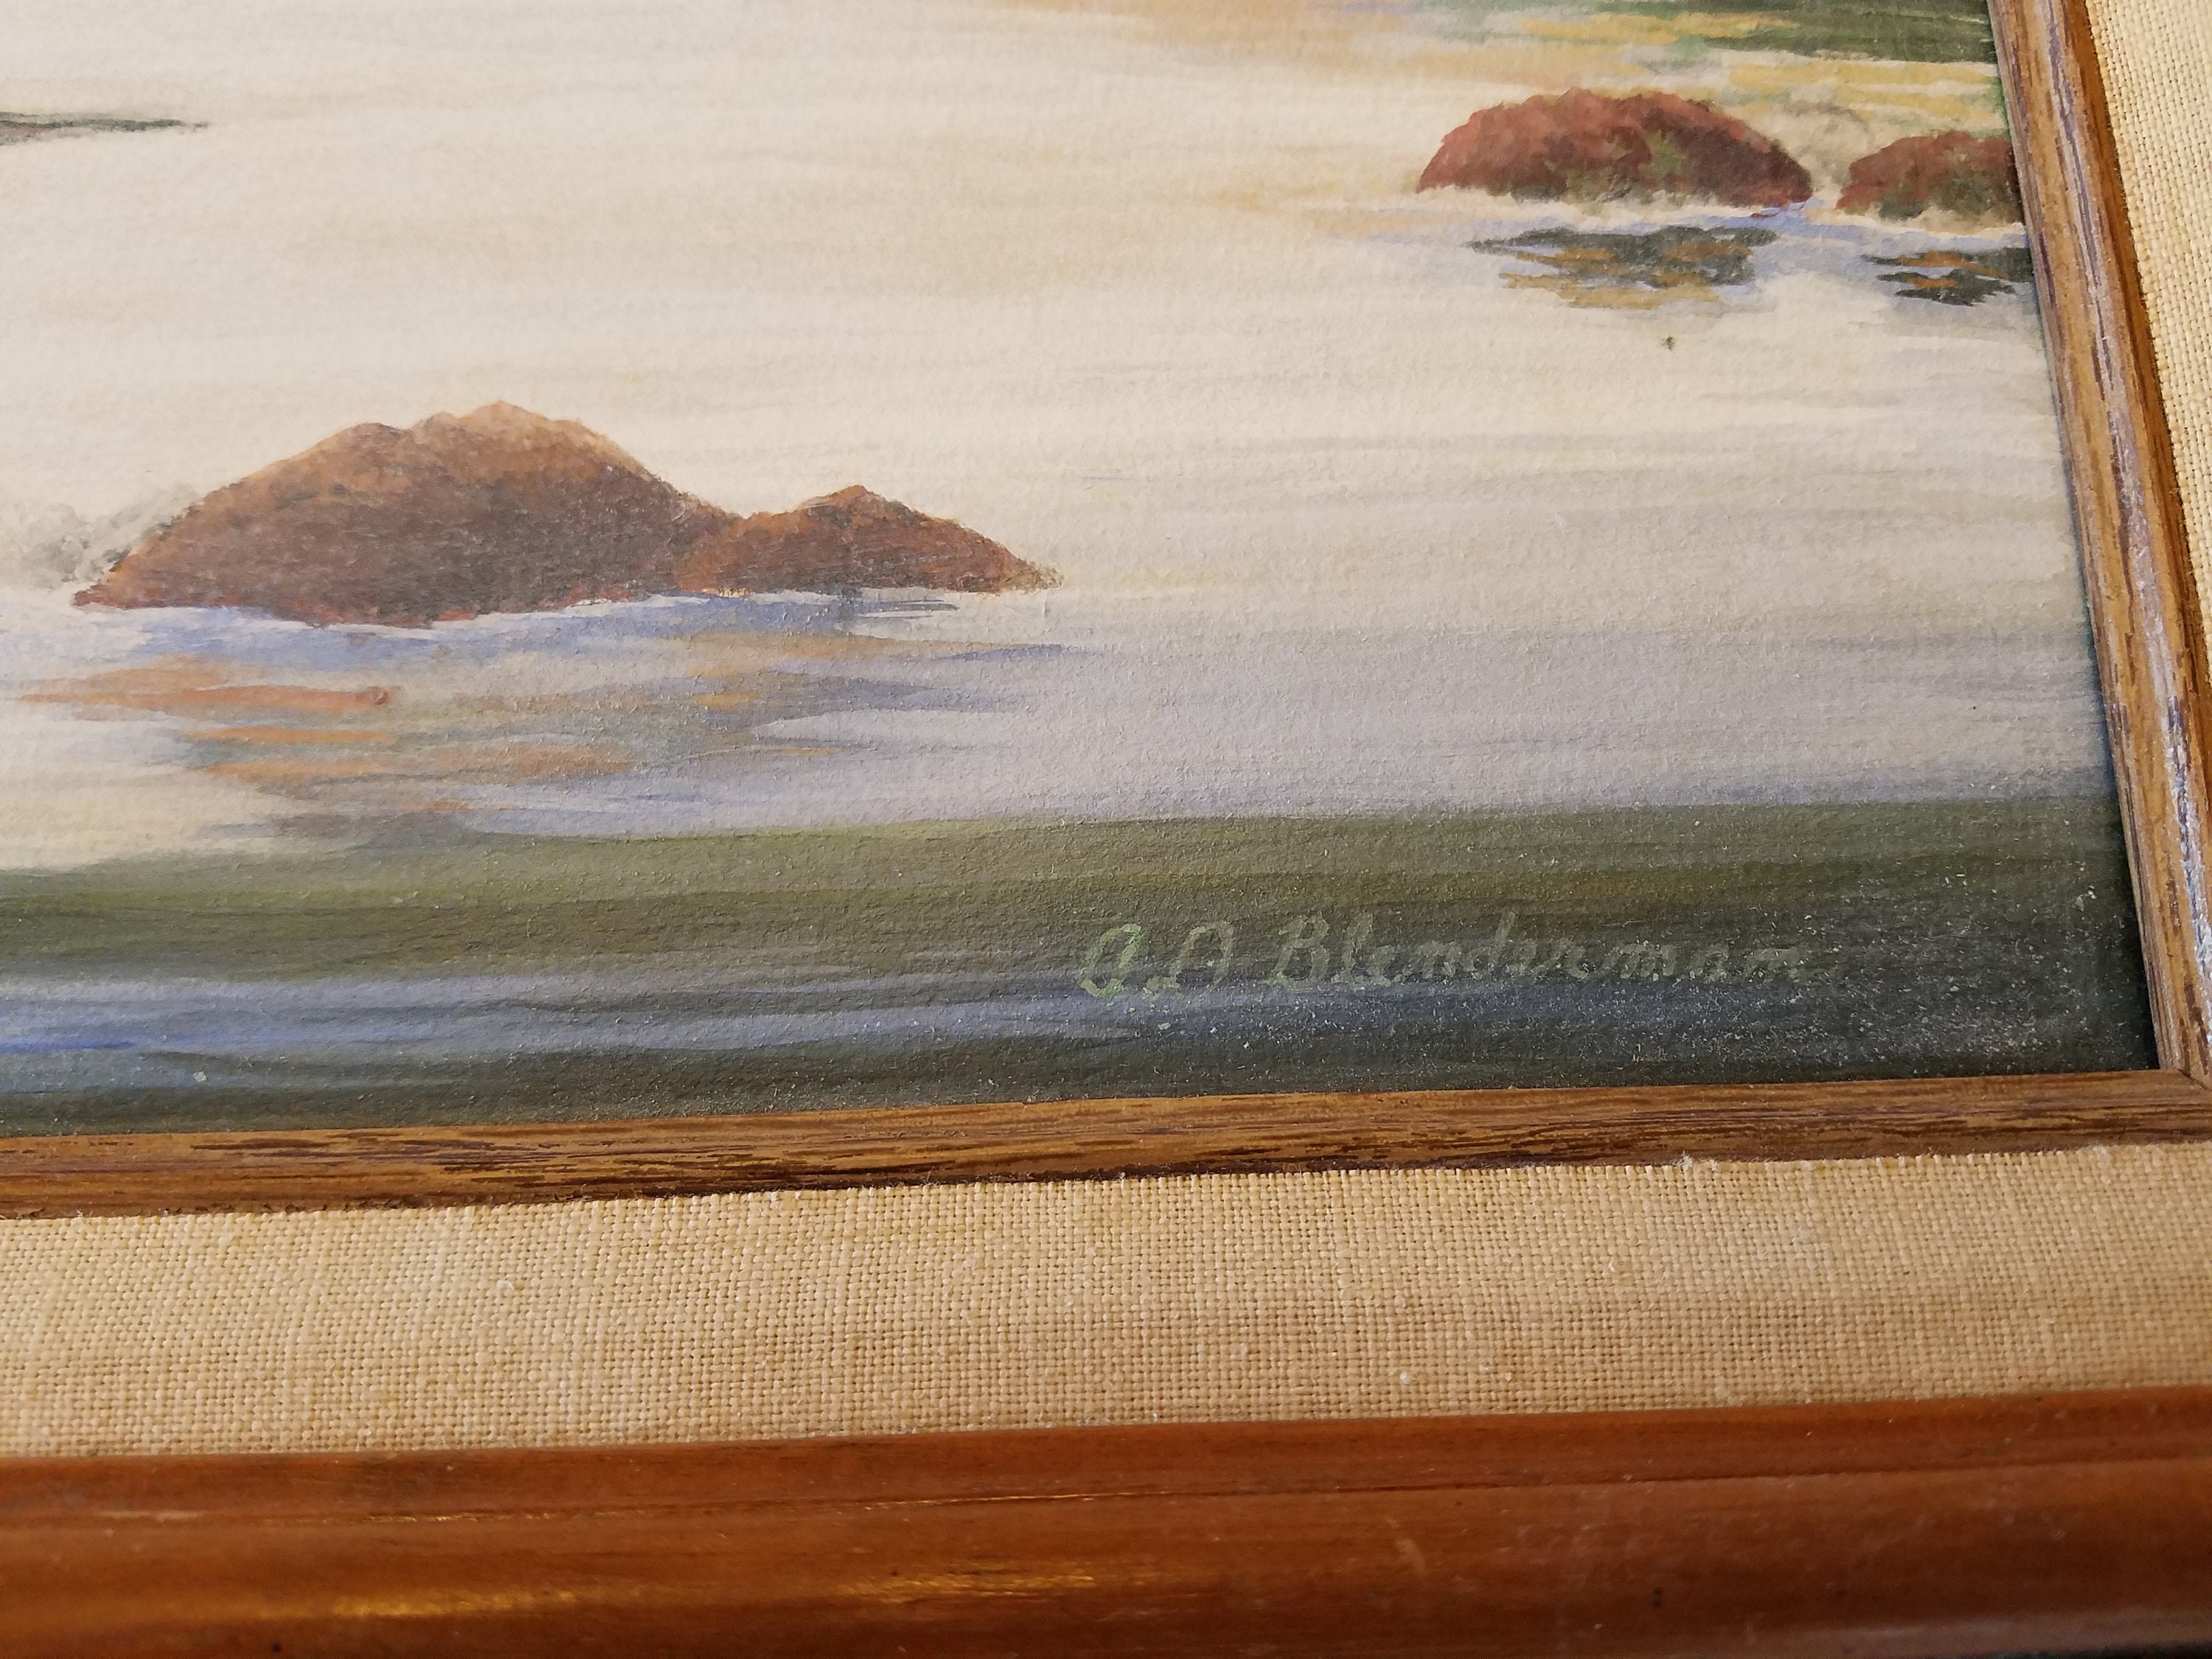 Signed Watercolor Board Art Painting by Blenderman 1983 Maine Coast 23x19  Ocean Nautical Decor Picture Framed Nouveau Seafood Mainah -  Finland